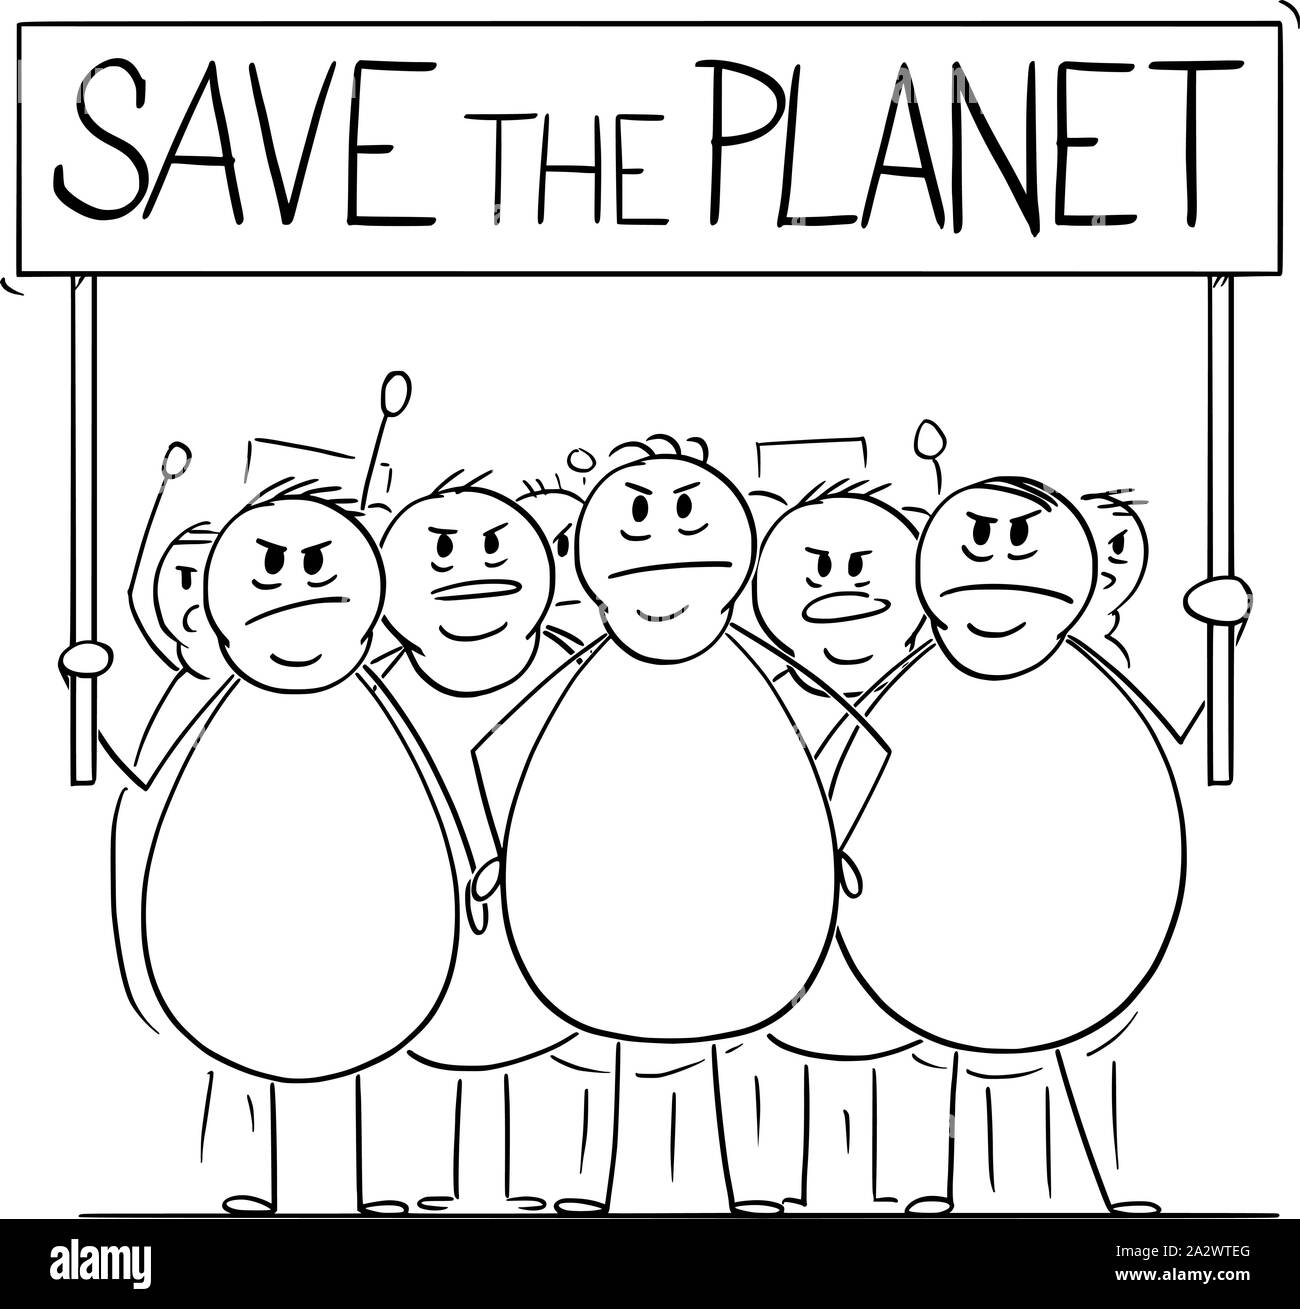 Vector cartoon stick figure drawing conceptual illustration of group of angry overweight or fat men or people on demonstration demonstrating with Save the Planet sign. Concept of consumerism and sustainability. Stock Vector